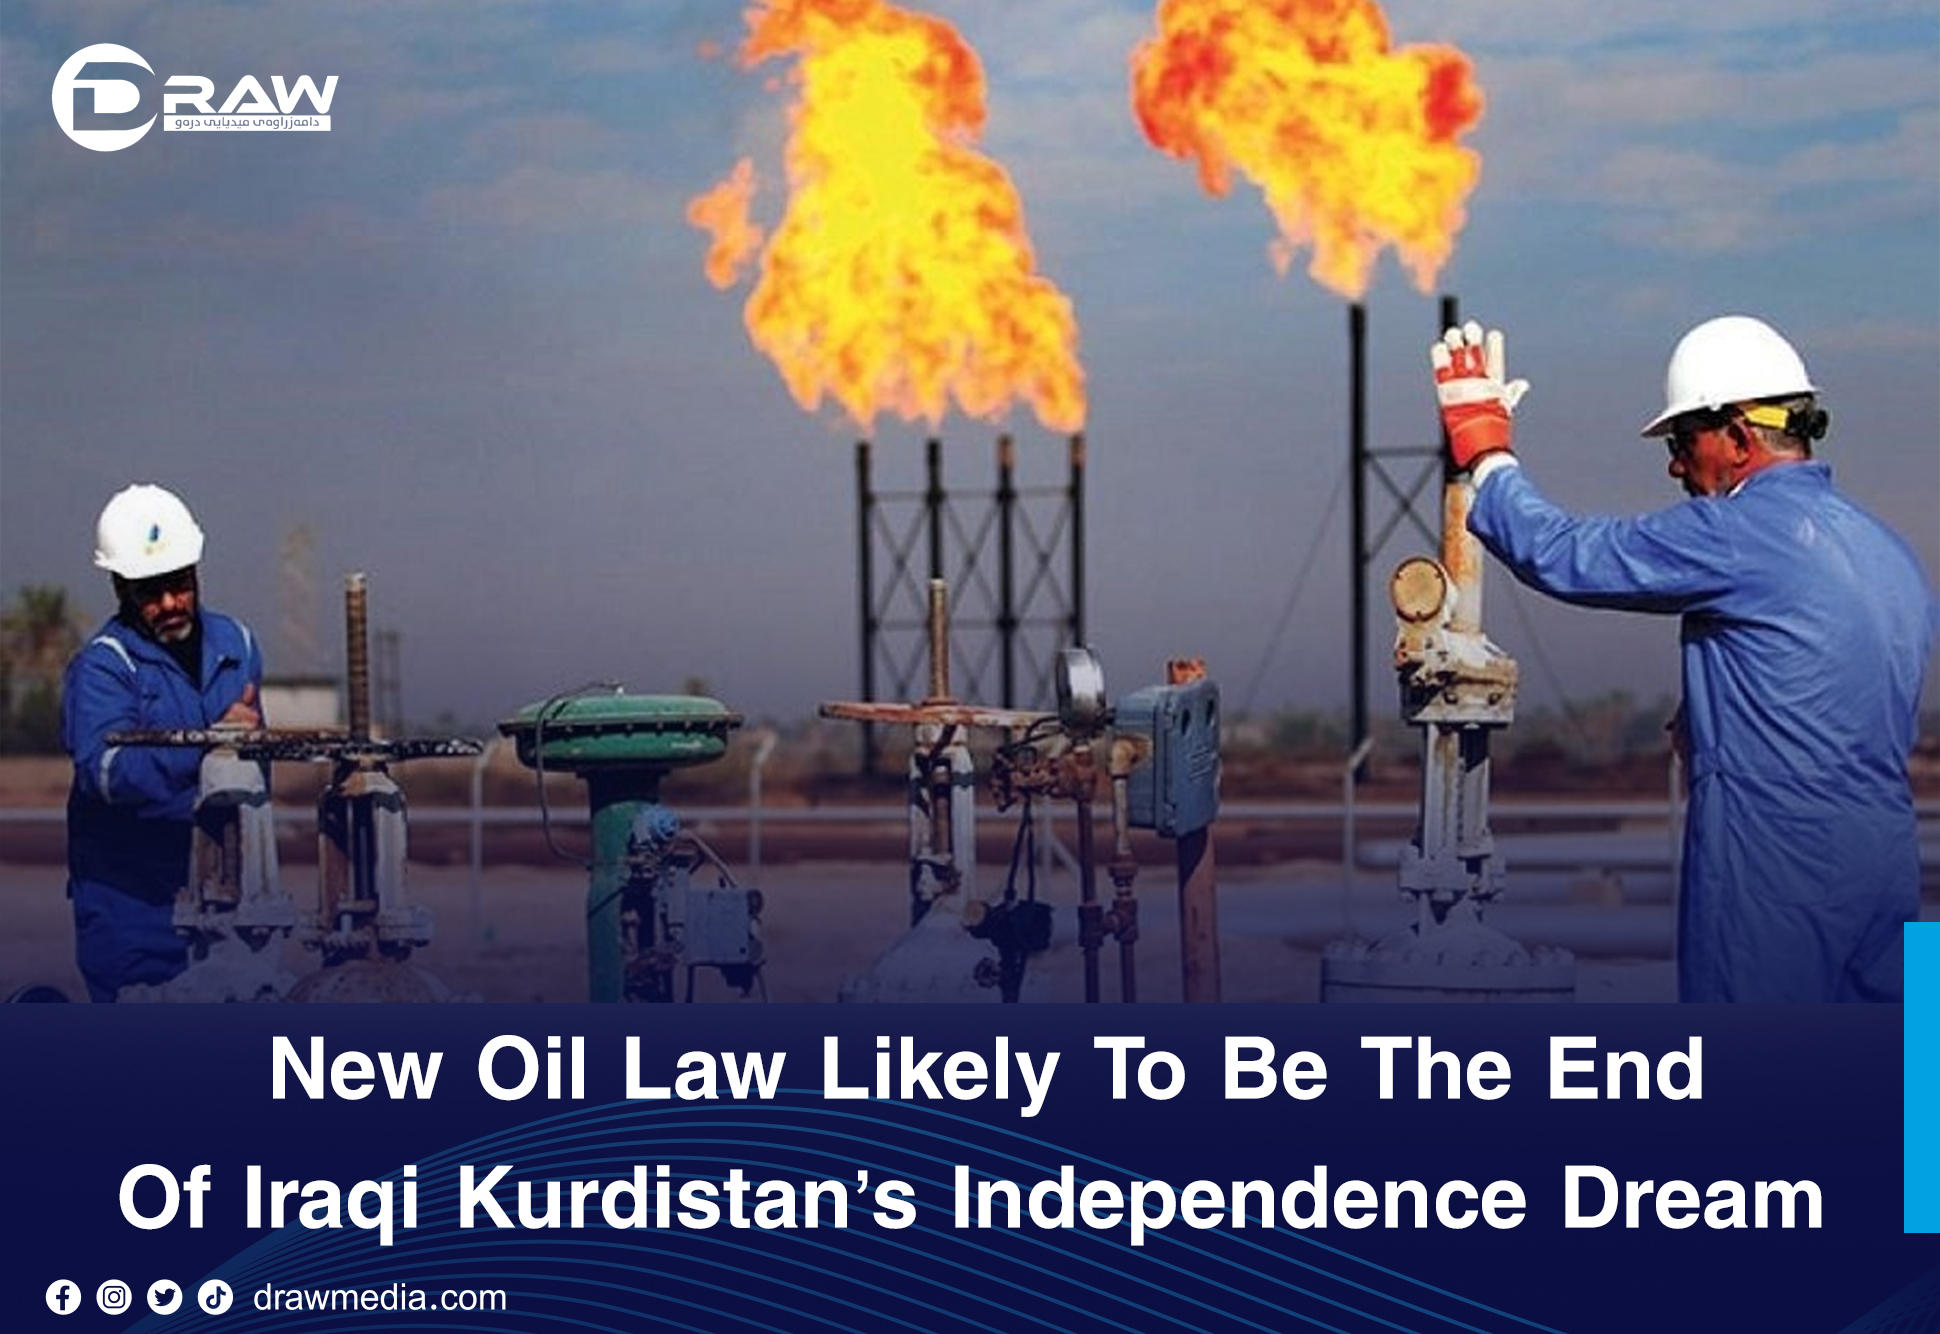 DrawMedia.net / New Oil Law Likely To Be The End Of Iraqi Kurdistan’s Independence Dream